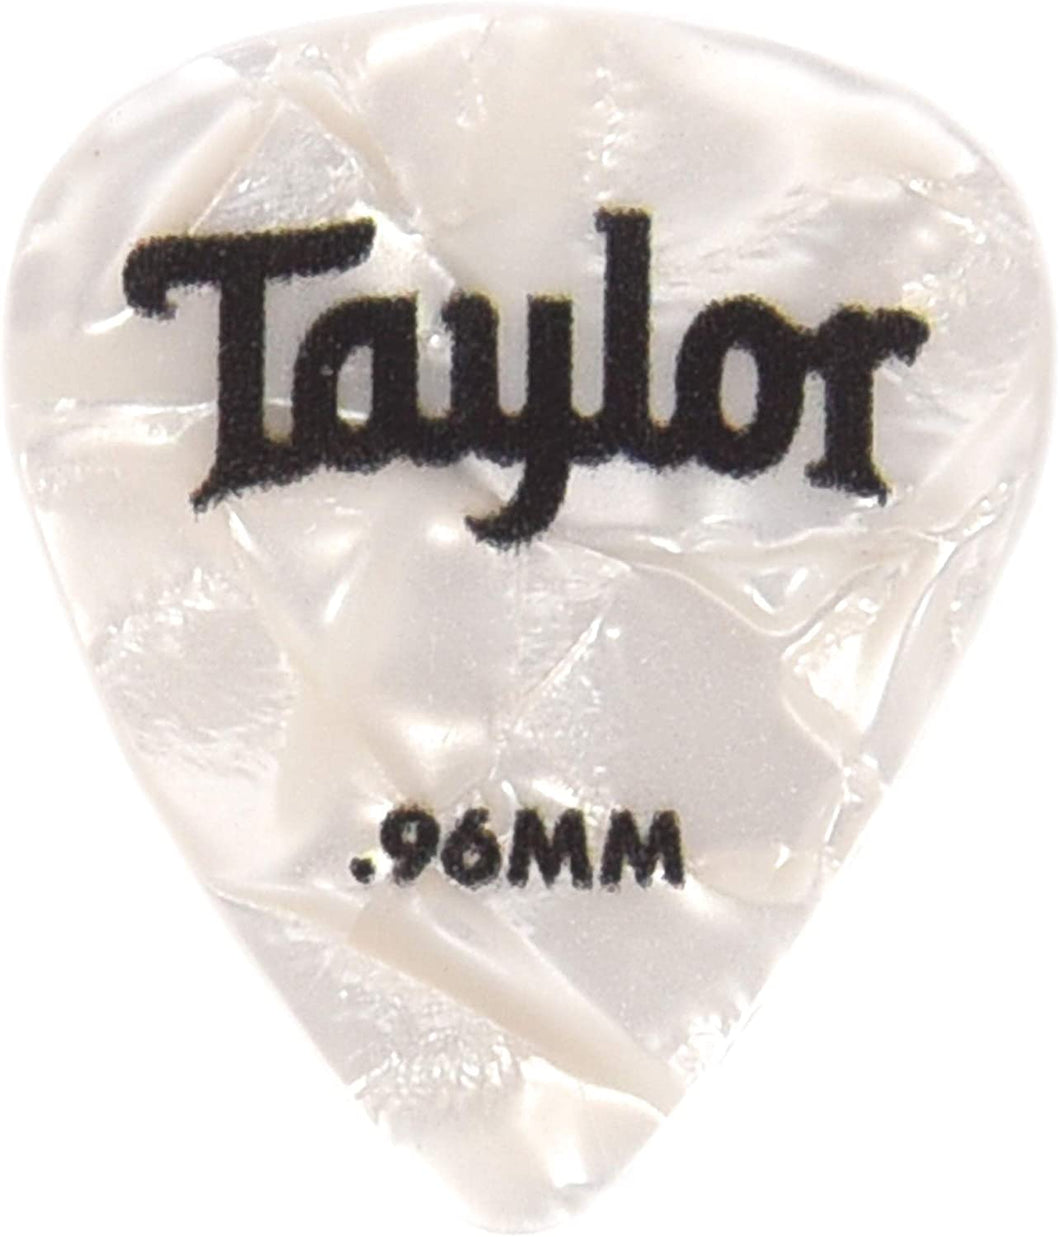 Taylor Picks - Celluloid 351, White Pearl, .96 mm, 12 Pack